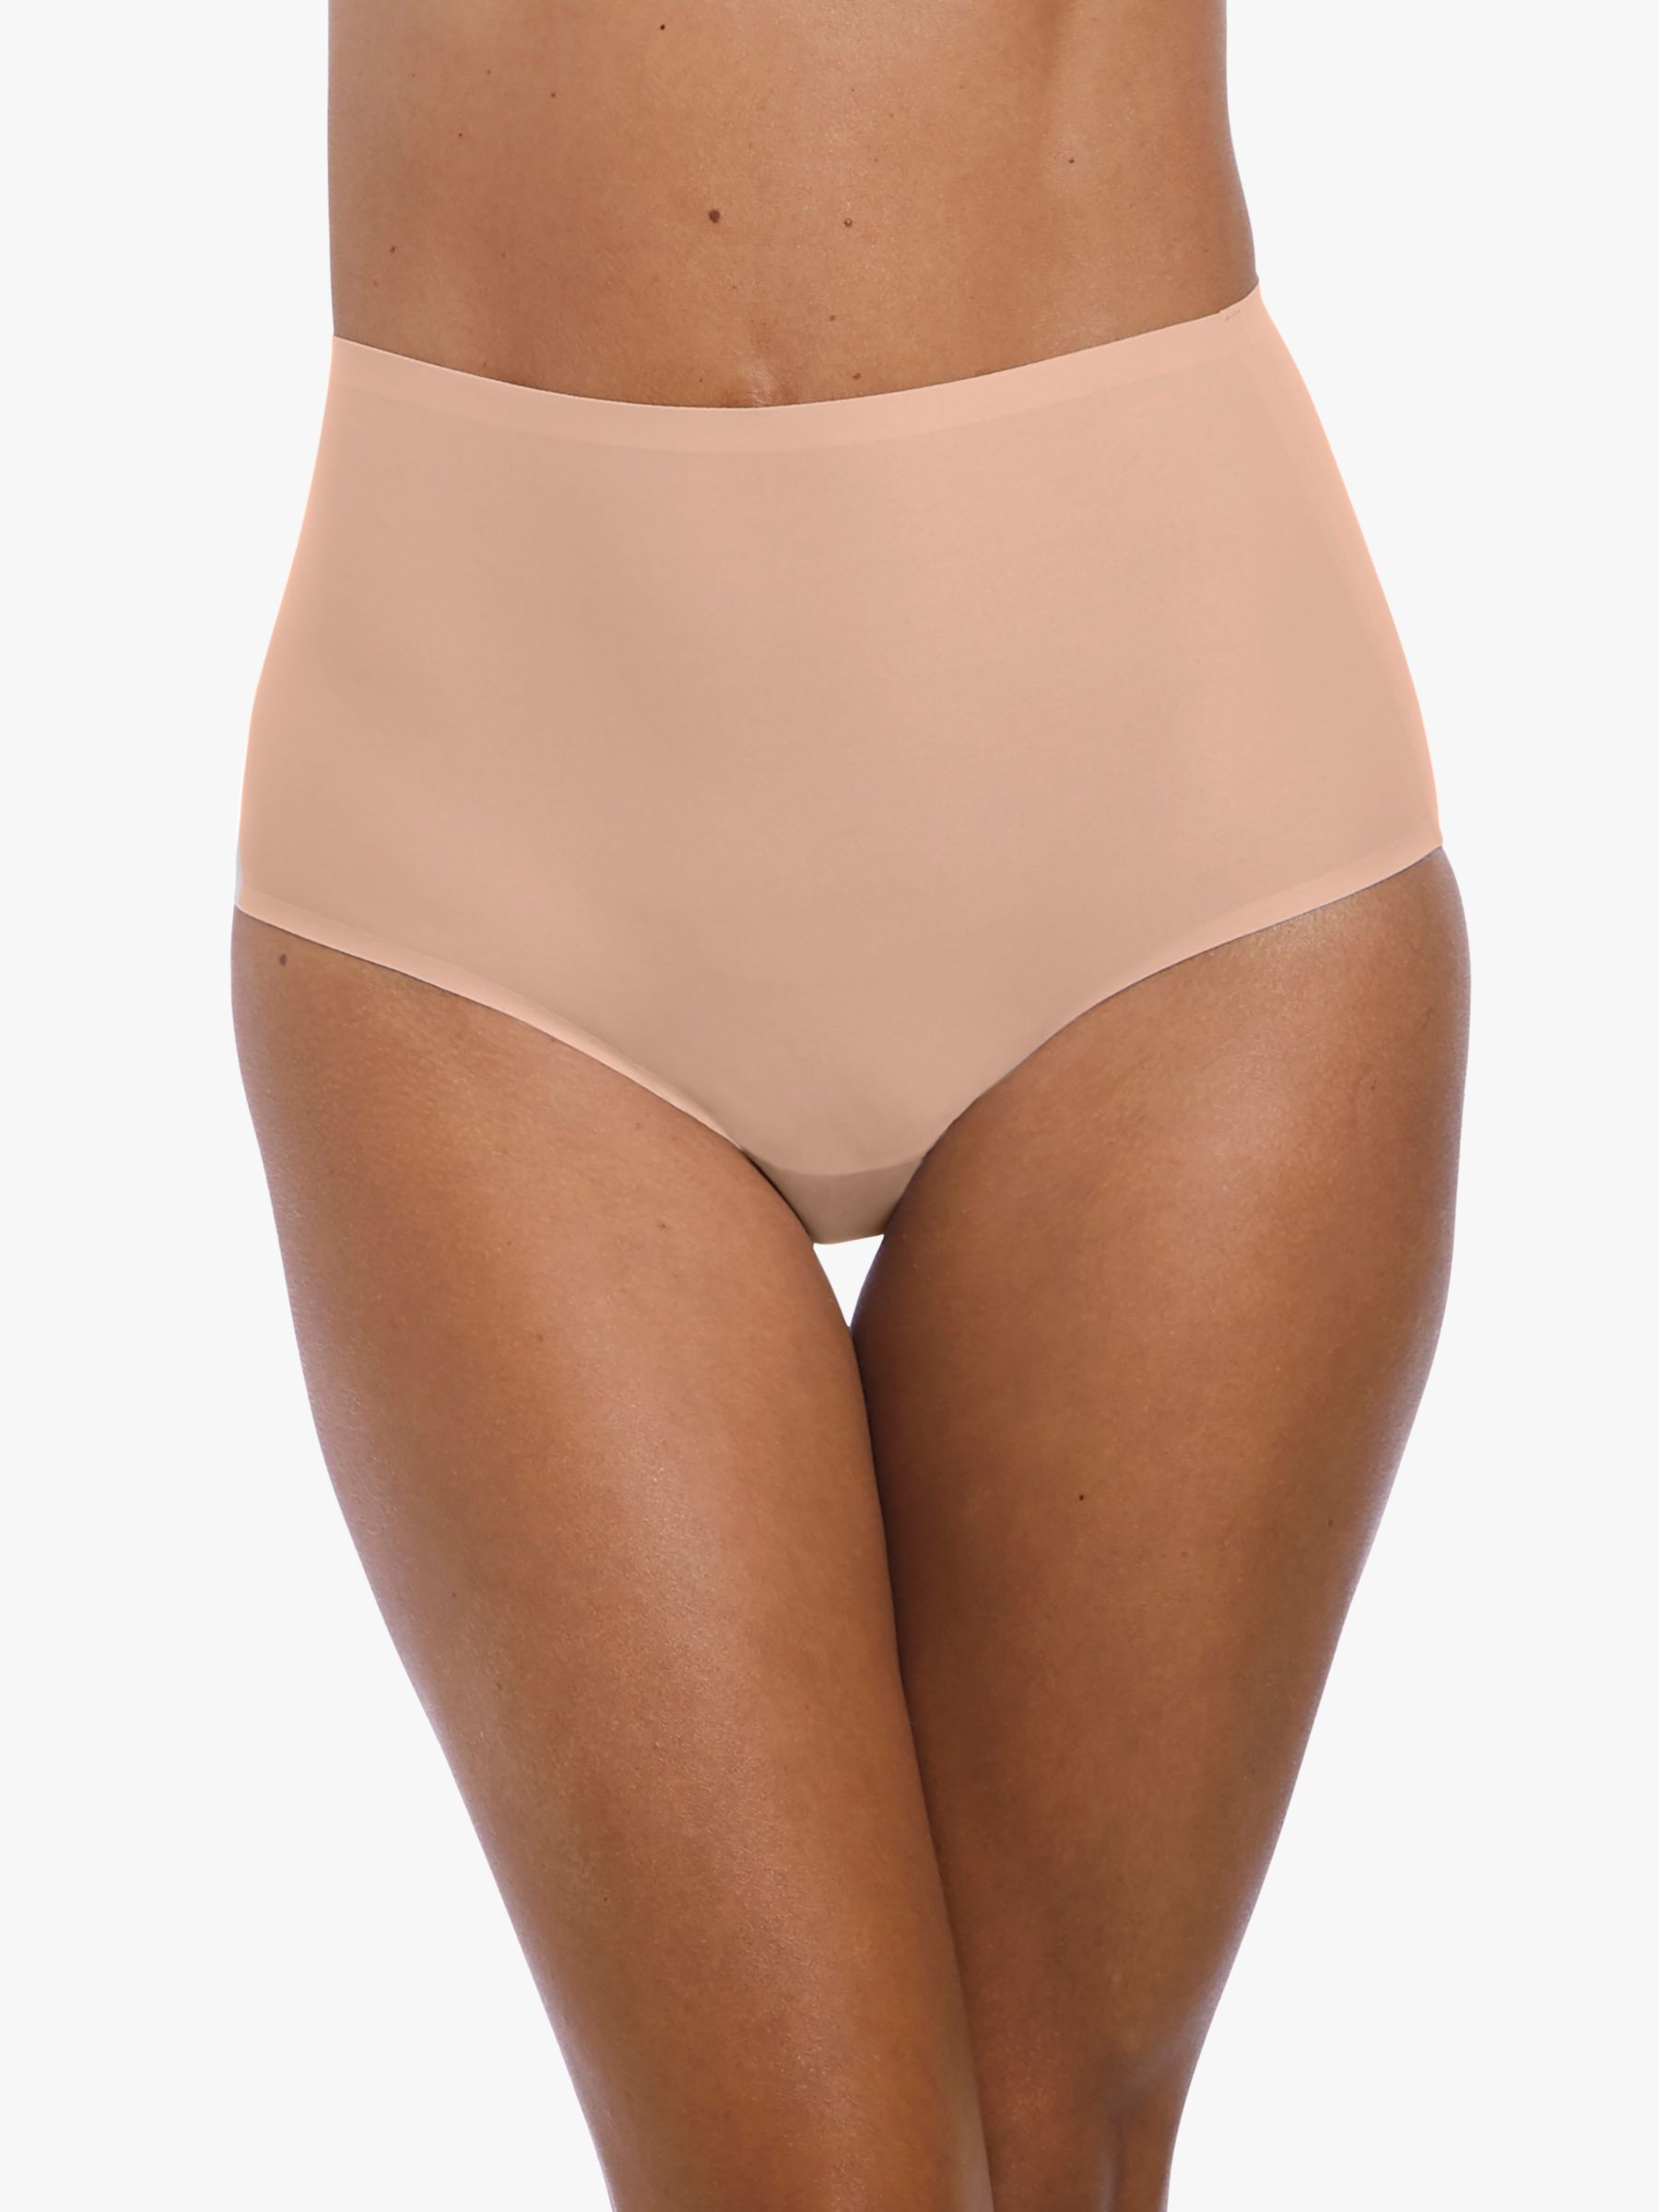 Buy Black/White/Nude High Leg Microfibre Knickers 5 Pack from Next Australia